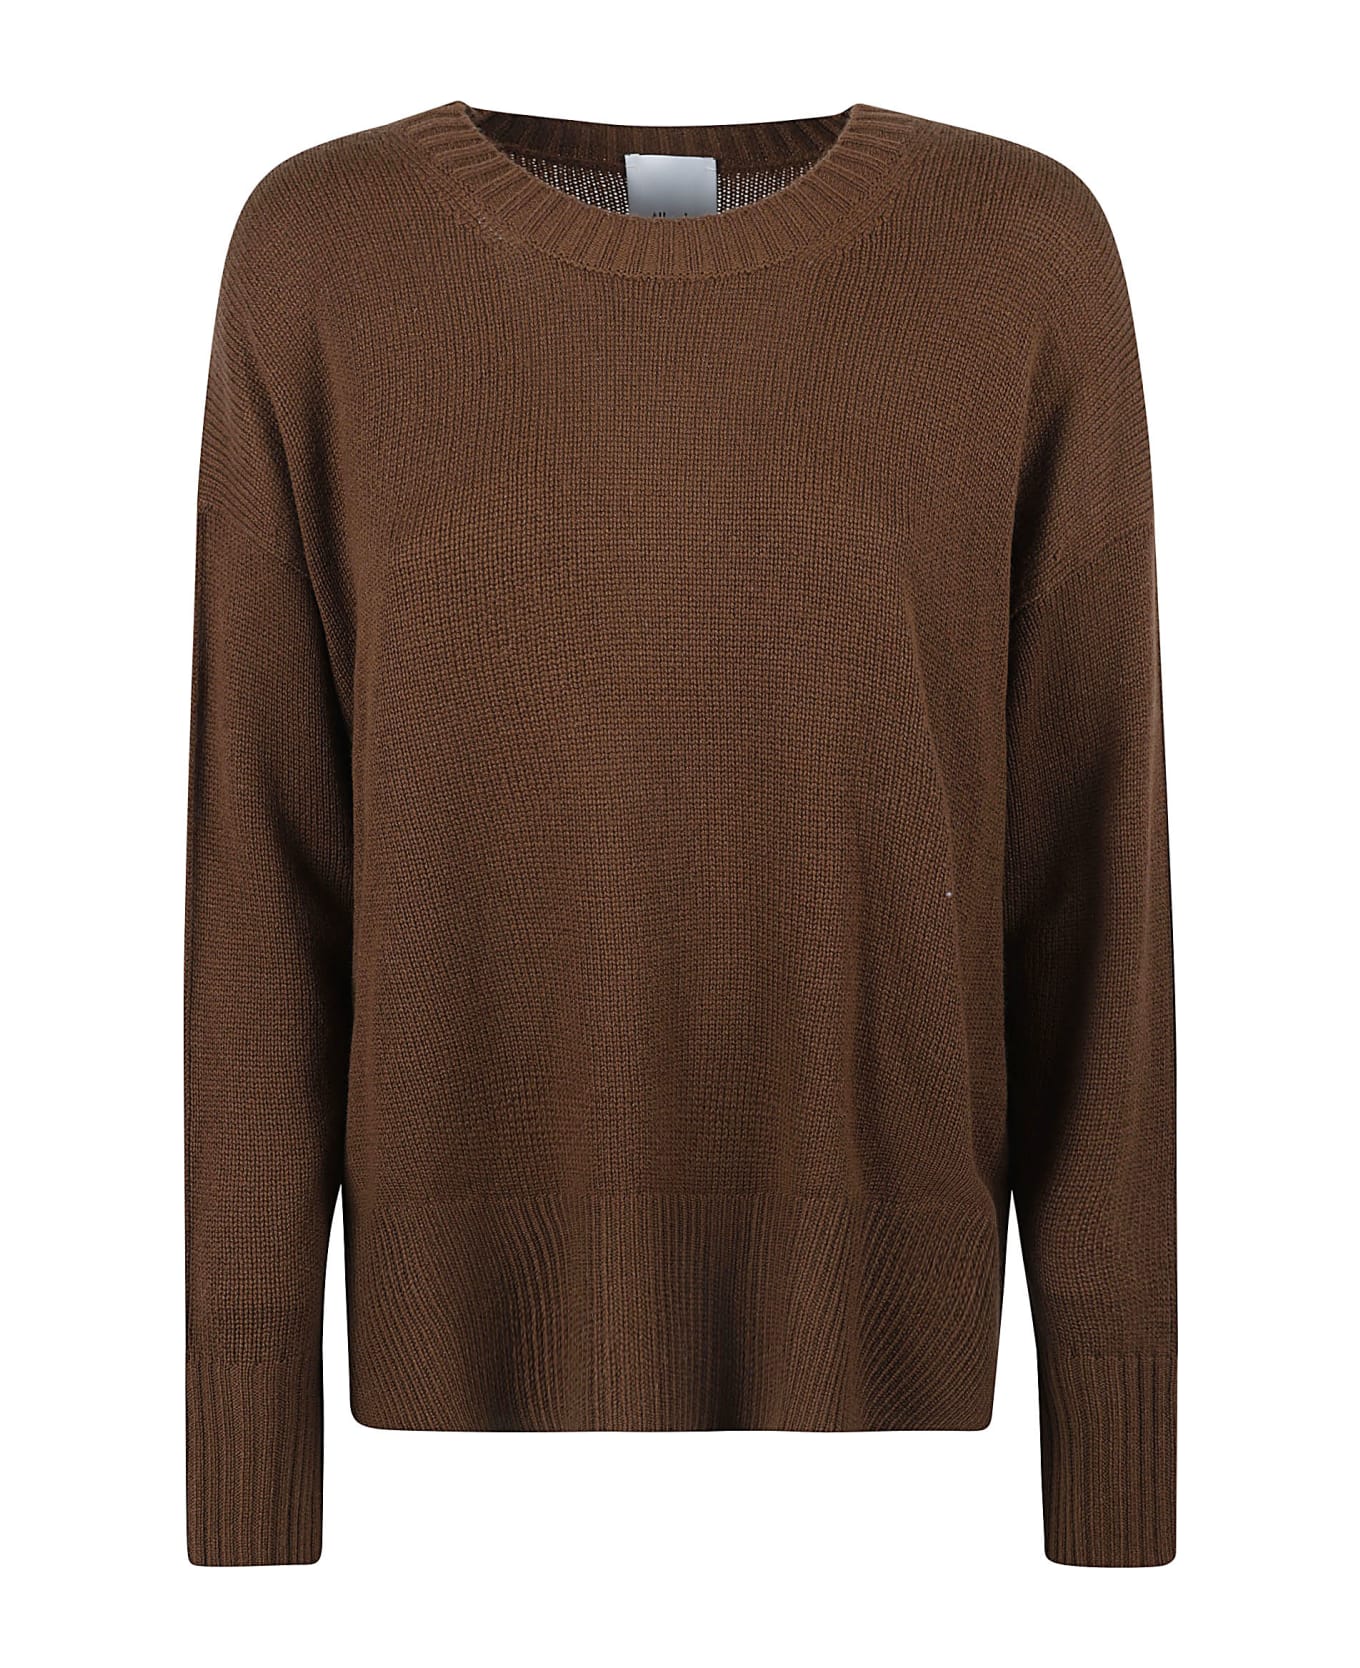 Allude Loose Fit Side Slit Knit Sweater - Brown